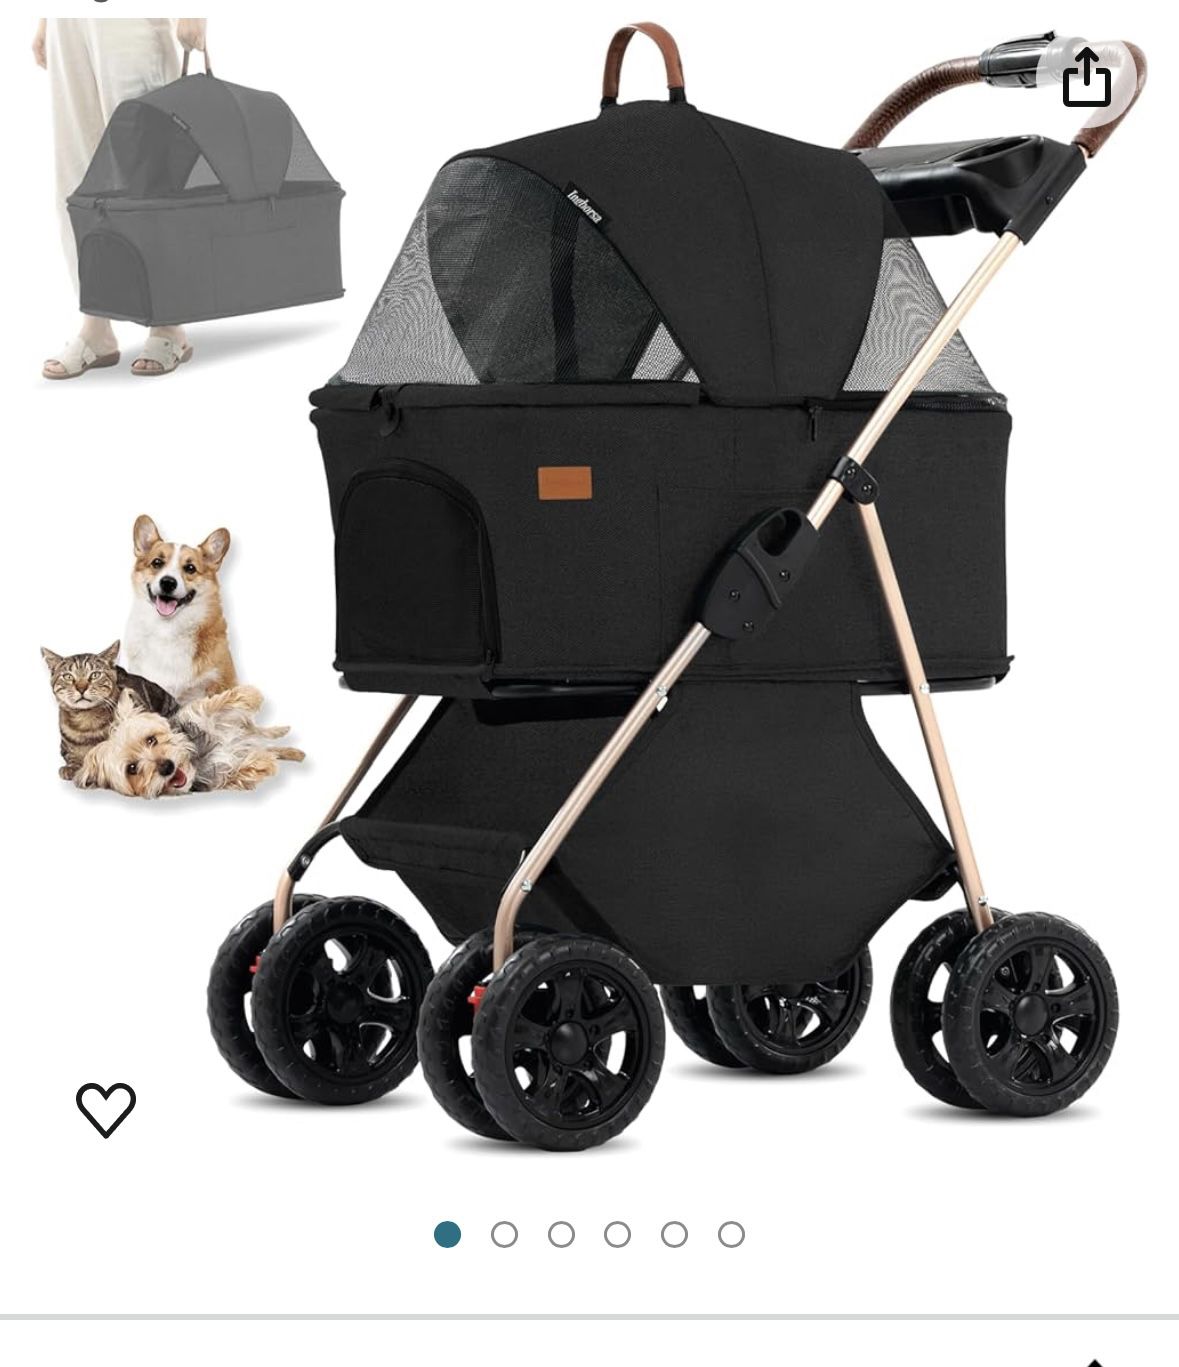 Pet Stroller, 3 in 1 Multifunction Pet Travel System,4 Wheel Foldable Pet Stroller with Storage Basket for Small Medium Dogs & Cats.